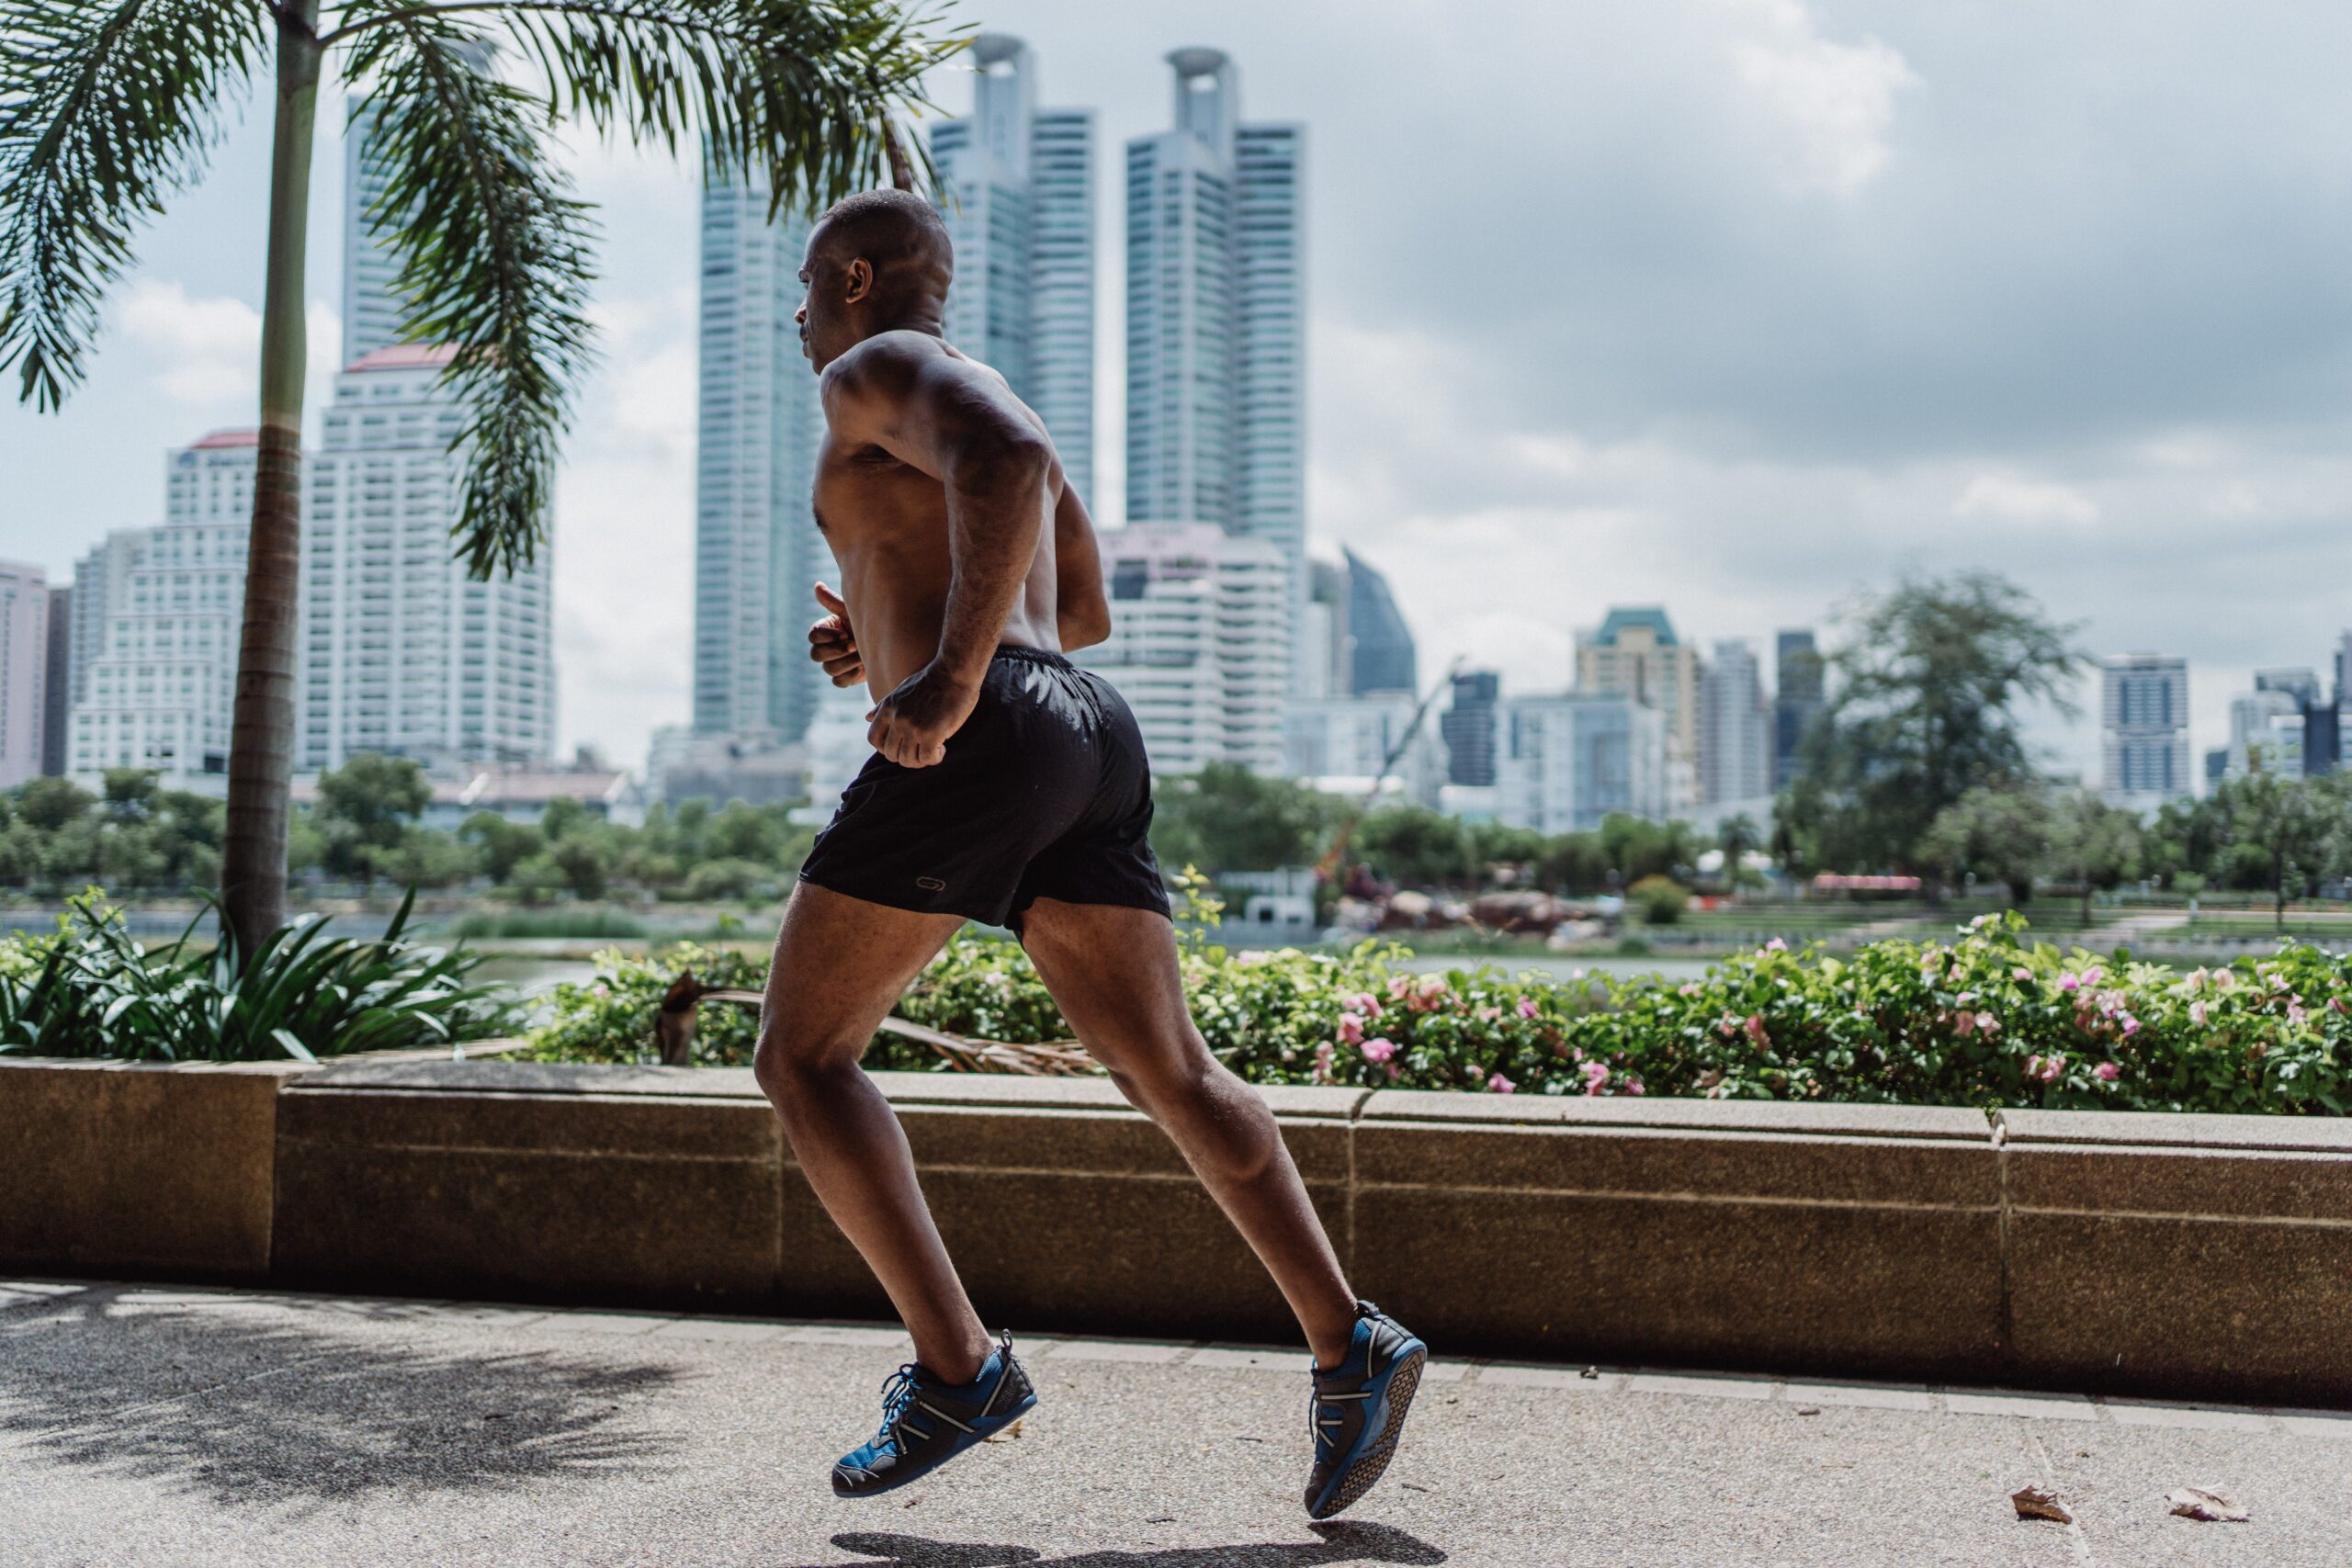 A black male jogging outdoors, wearing athletic attire and displaying determination and focus in his stride.